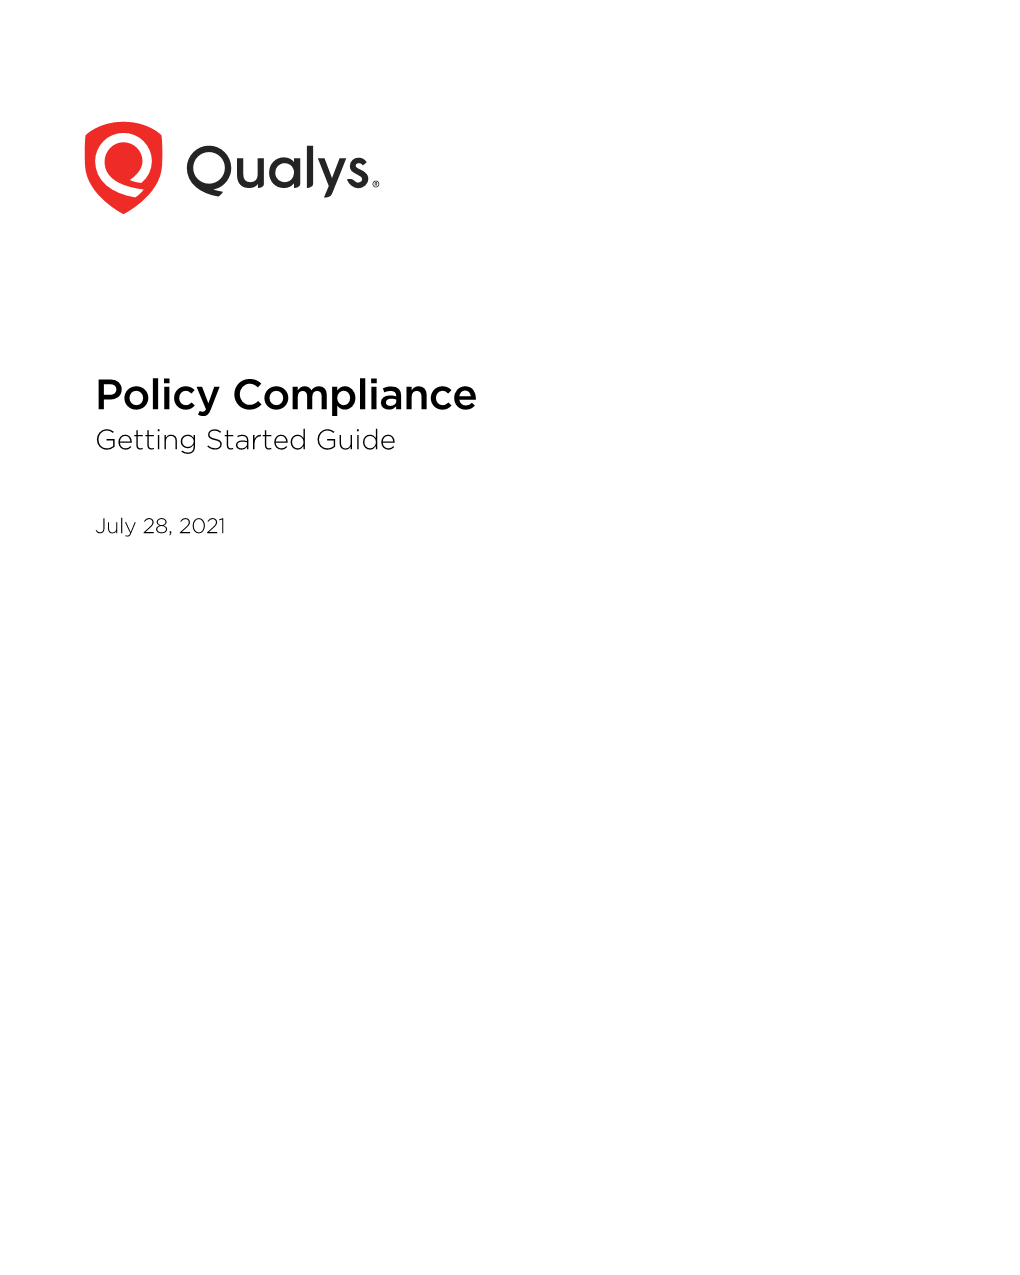 Qualys Policy Compliance Getting Started Guide